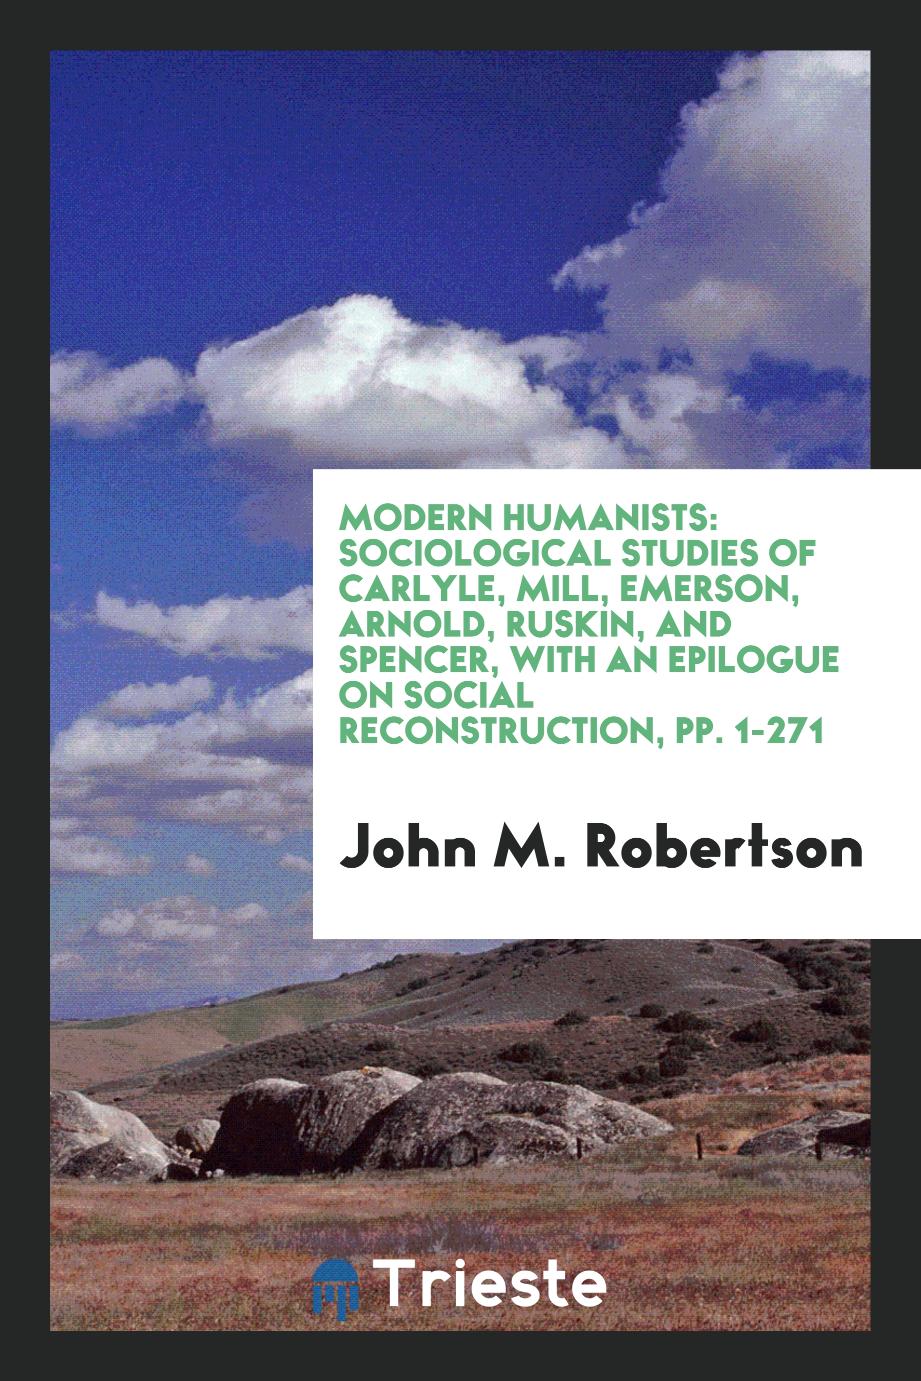 Modern Humanists: Sociological Studies of Carlyle, Mill, Emerson, Arnold, Ruskin, and Spencer, with an Epilogue on Social Reconstruction, pp. 1-271